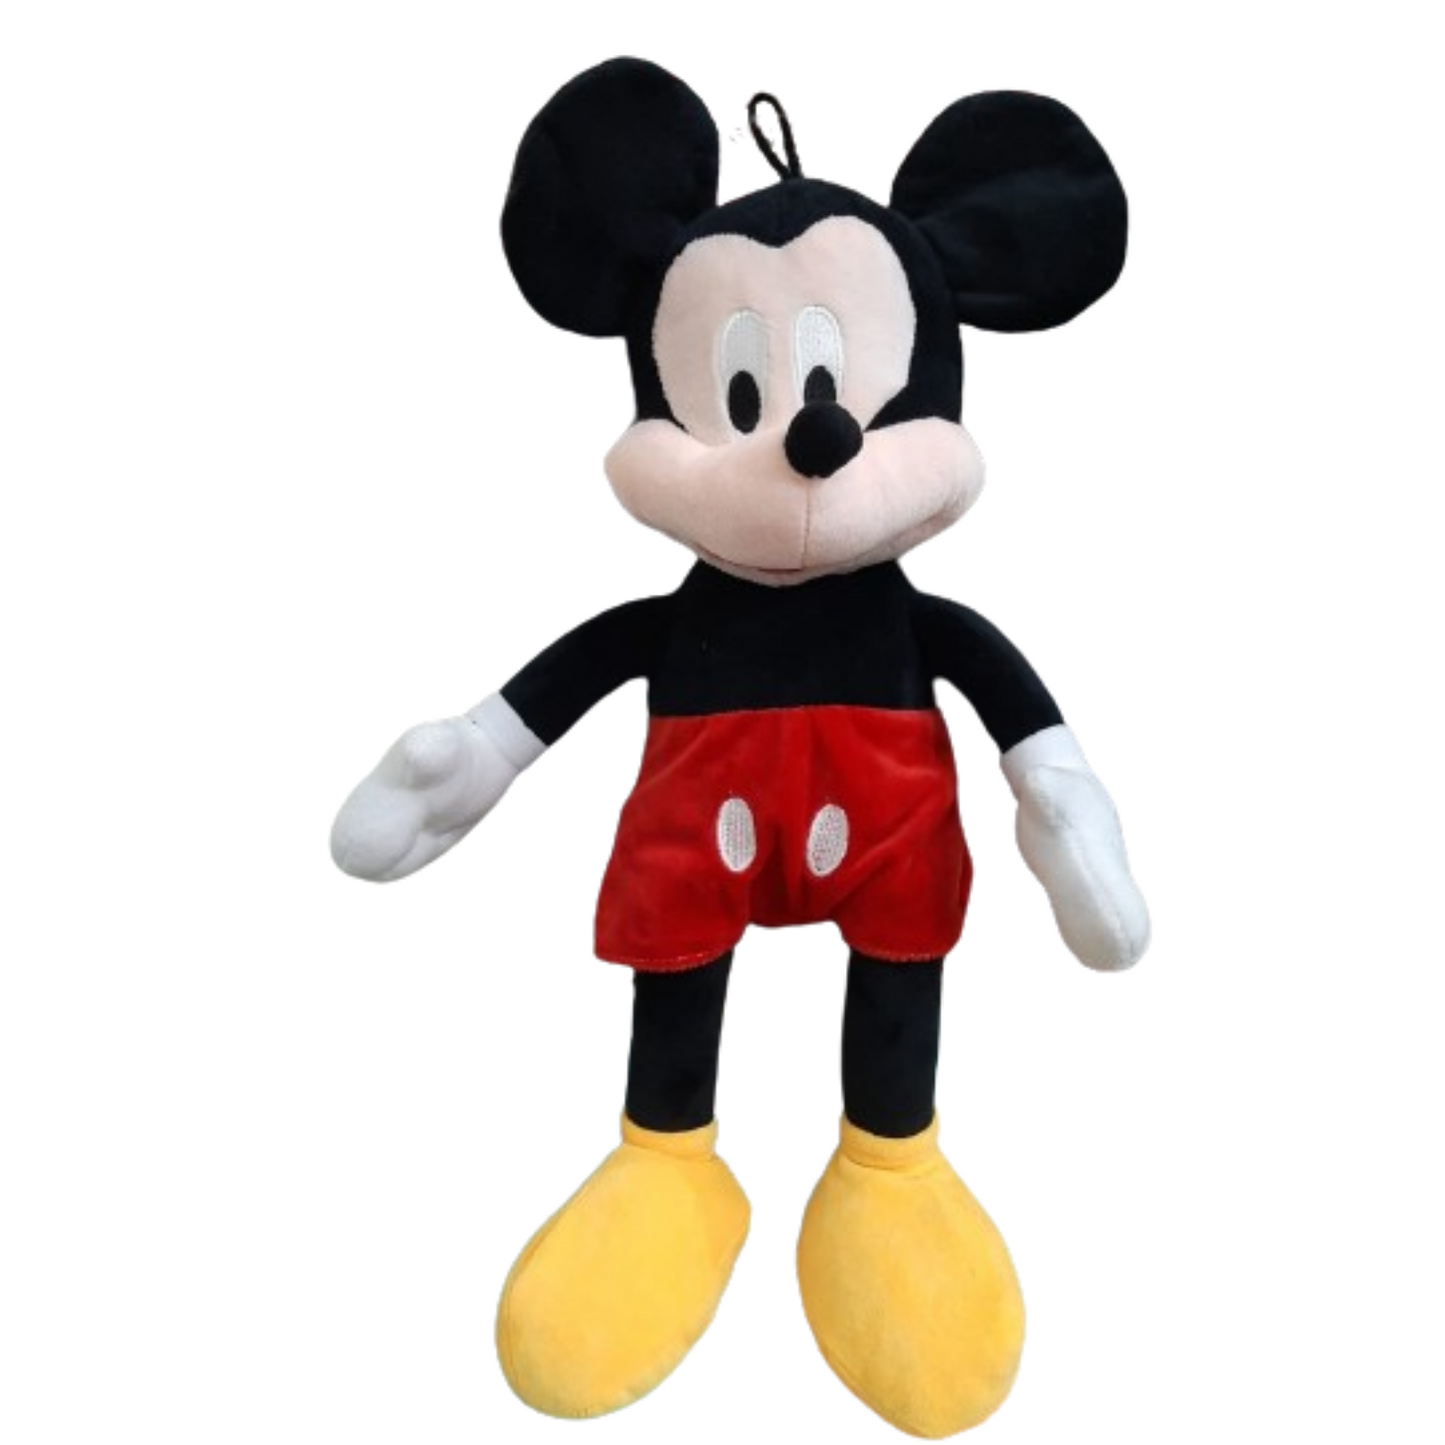 Mickie Mouse Stuffed Toy